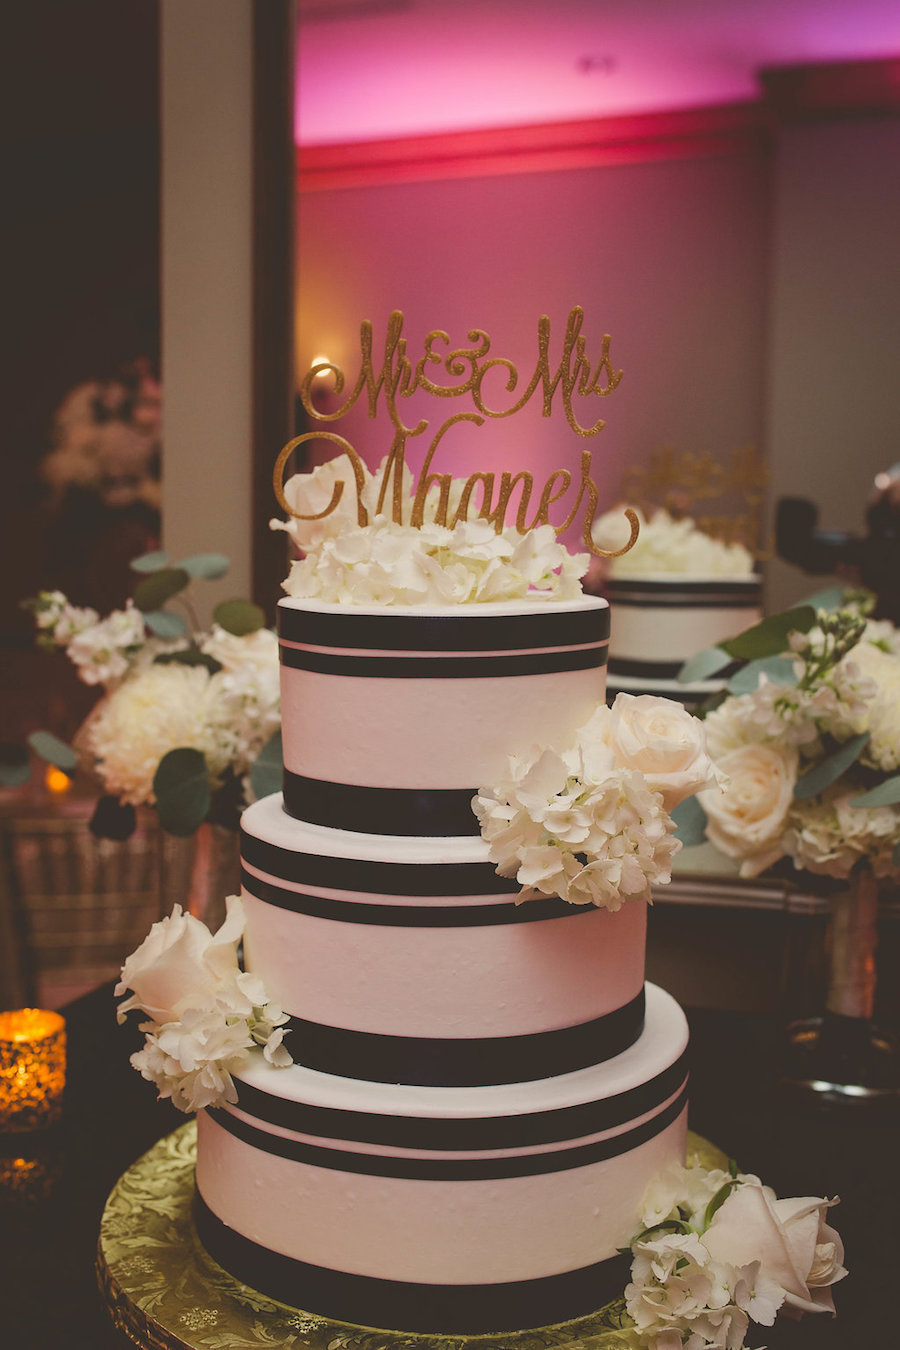 Three Tiered Round Wedding Cake with Vertical Black Stripes and White Hydrangea and Rose Flowers with Gold Mr and Mrs Topper